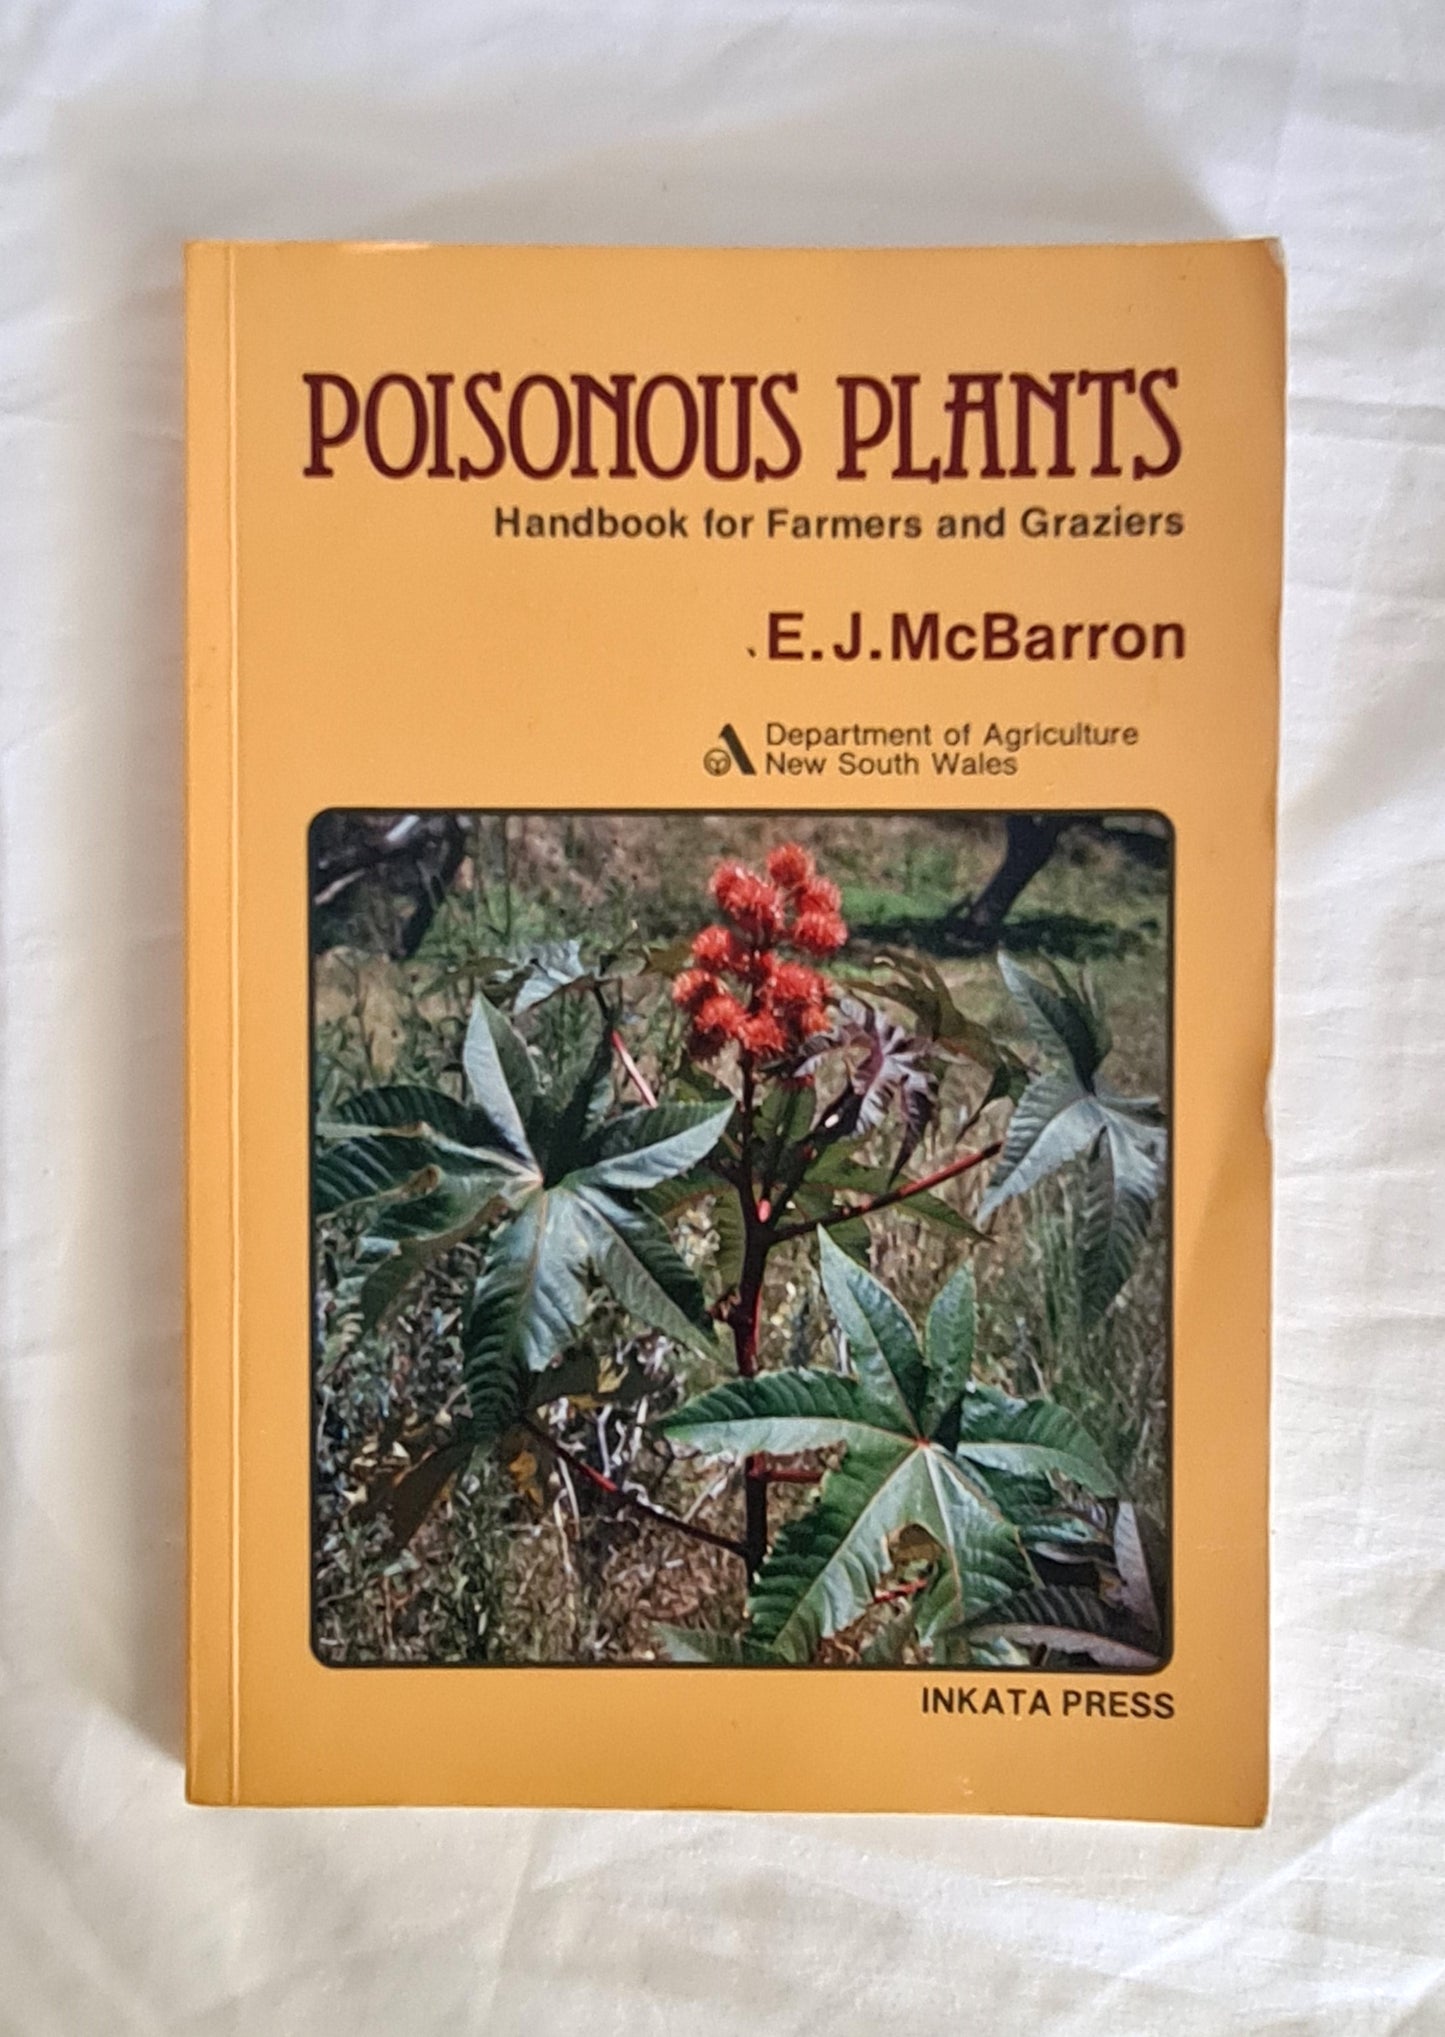 Poisonous Plants  Handbook for Farmers and Graziers  by E. J. McBarron